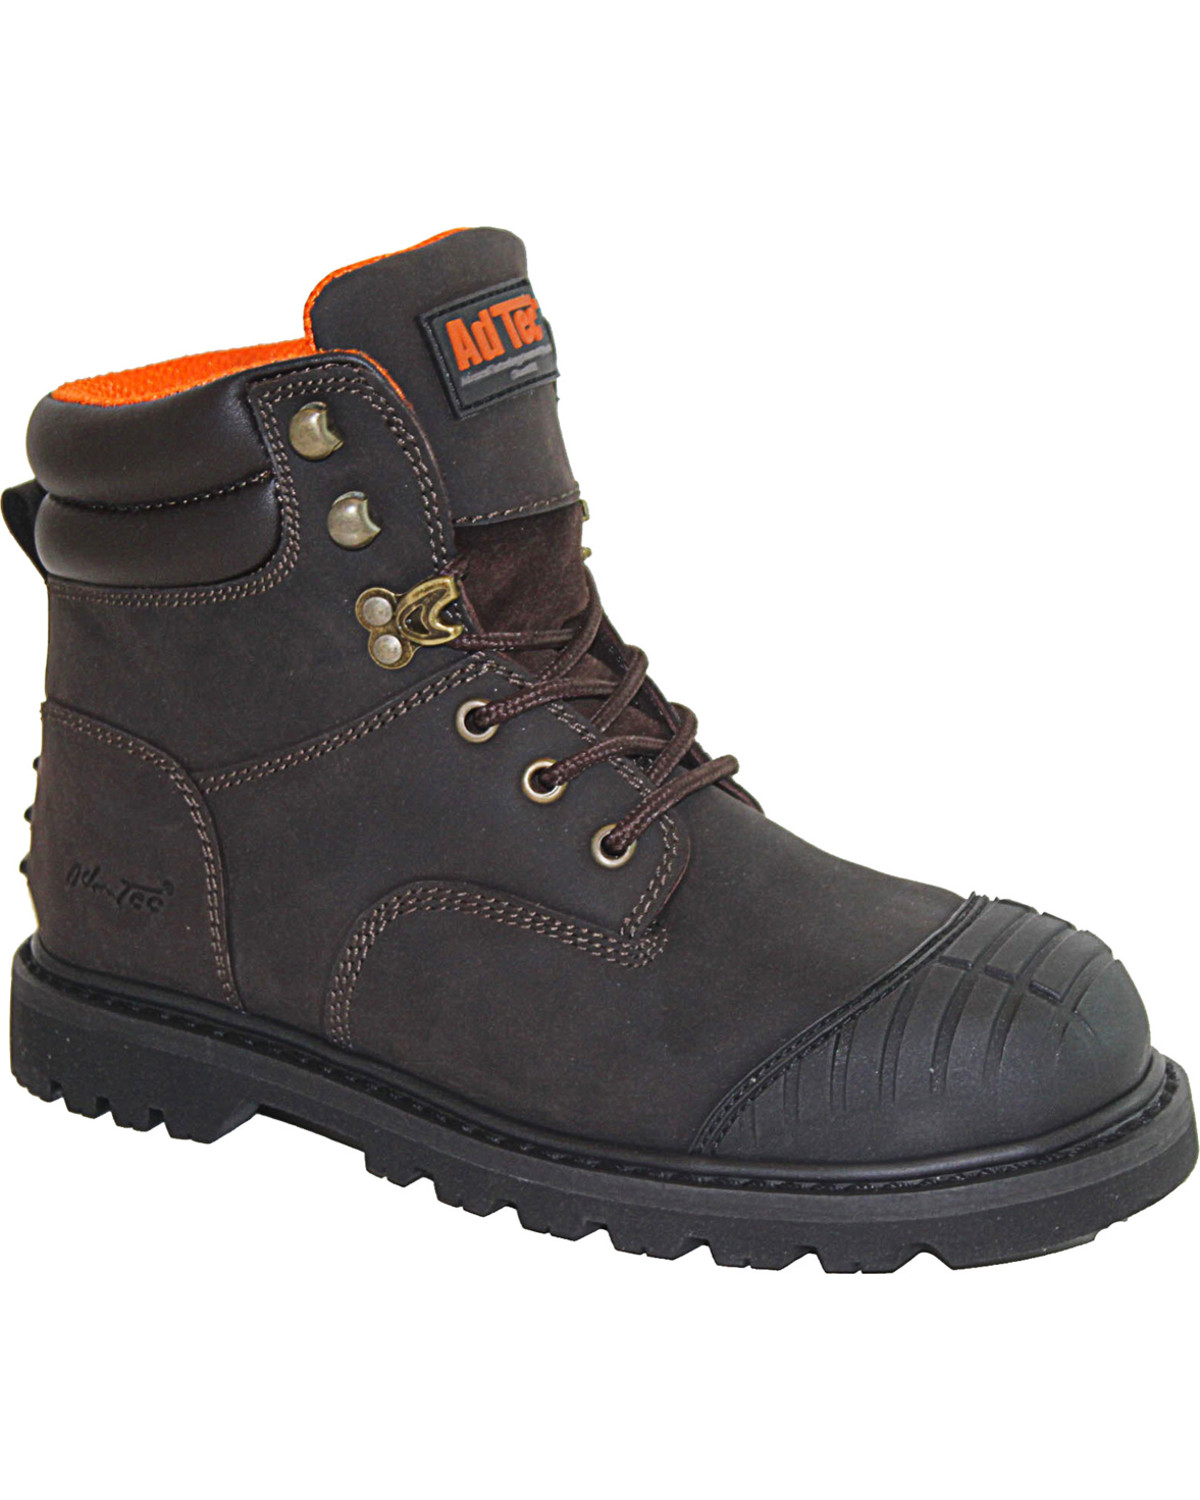 Ad Tec Men's 6" Oiled Leather Work Boots - Steel Toe